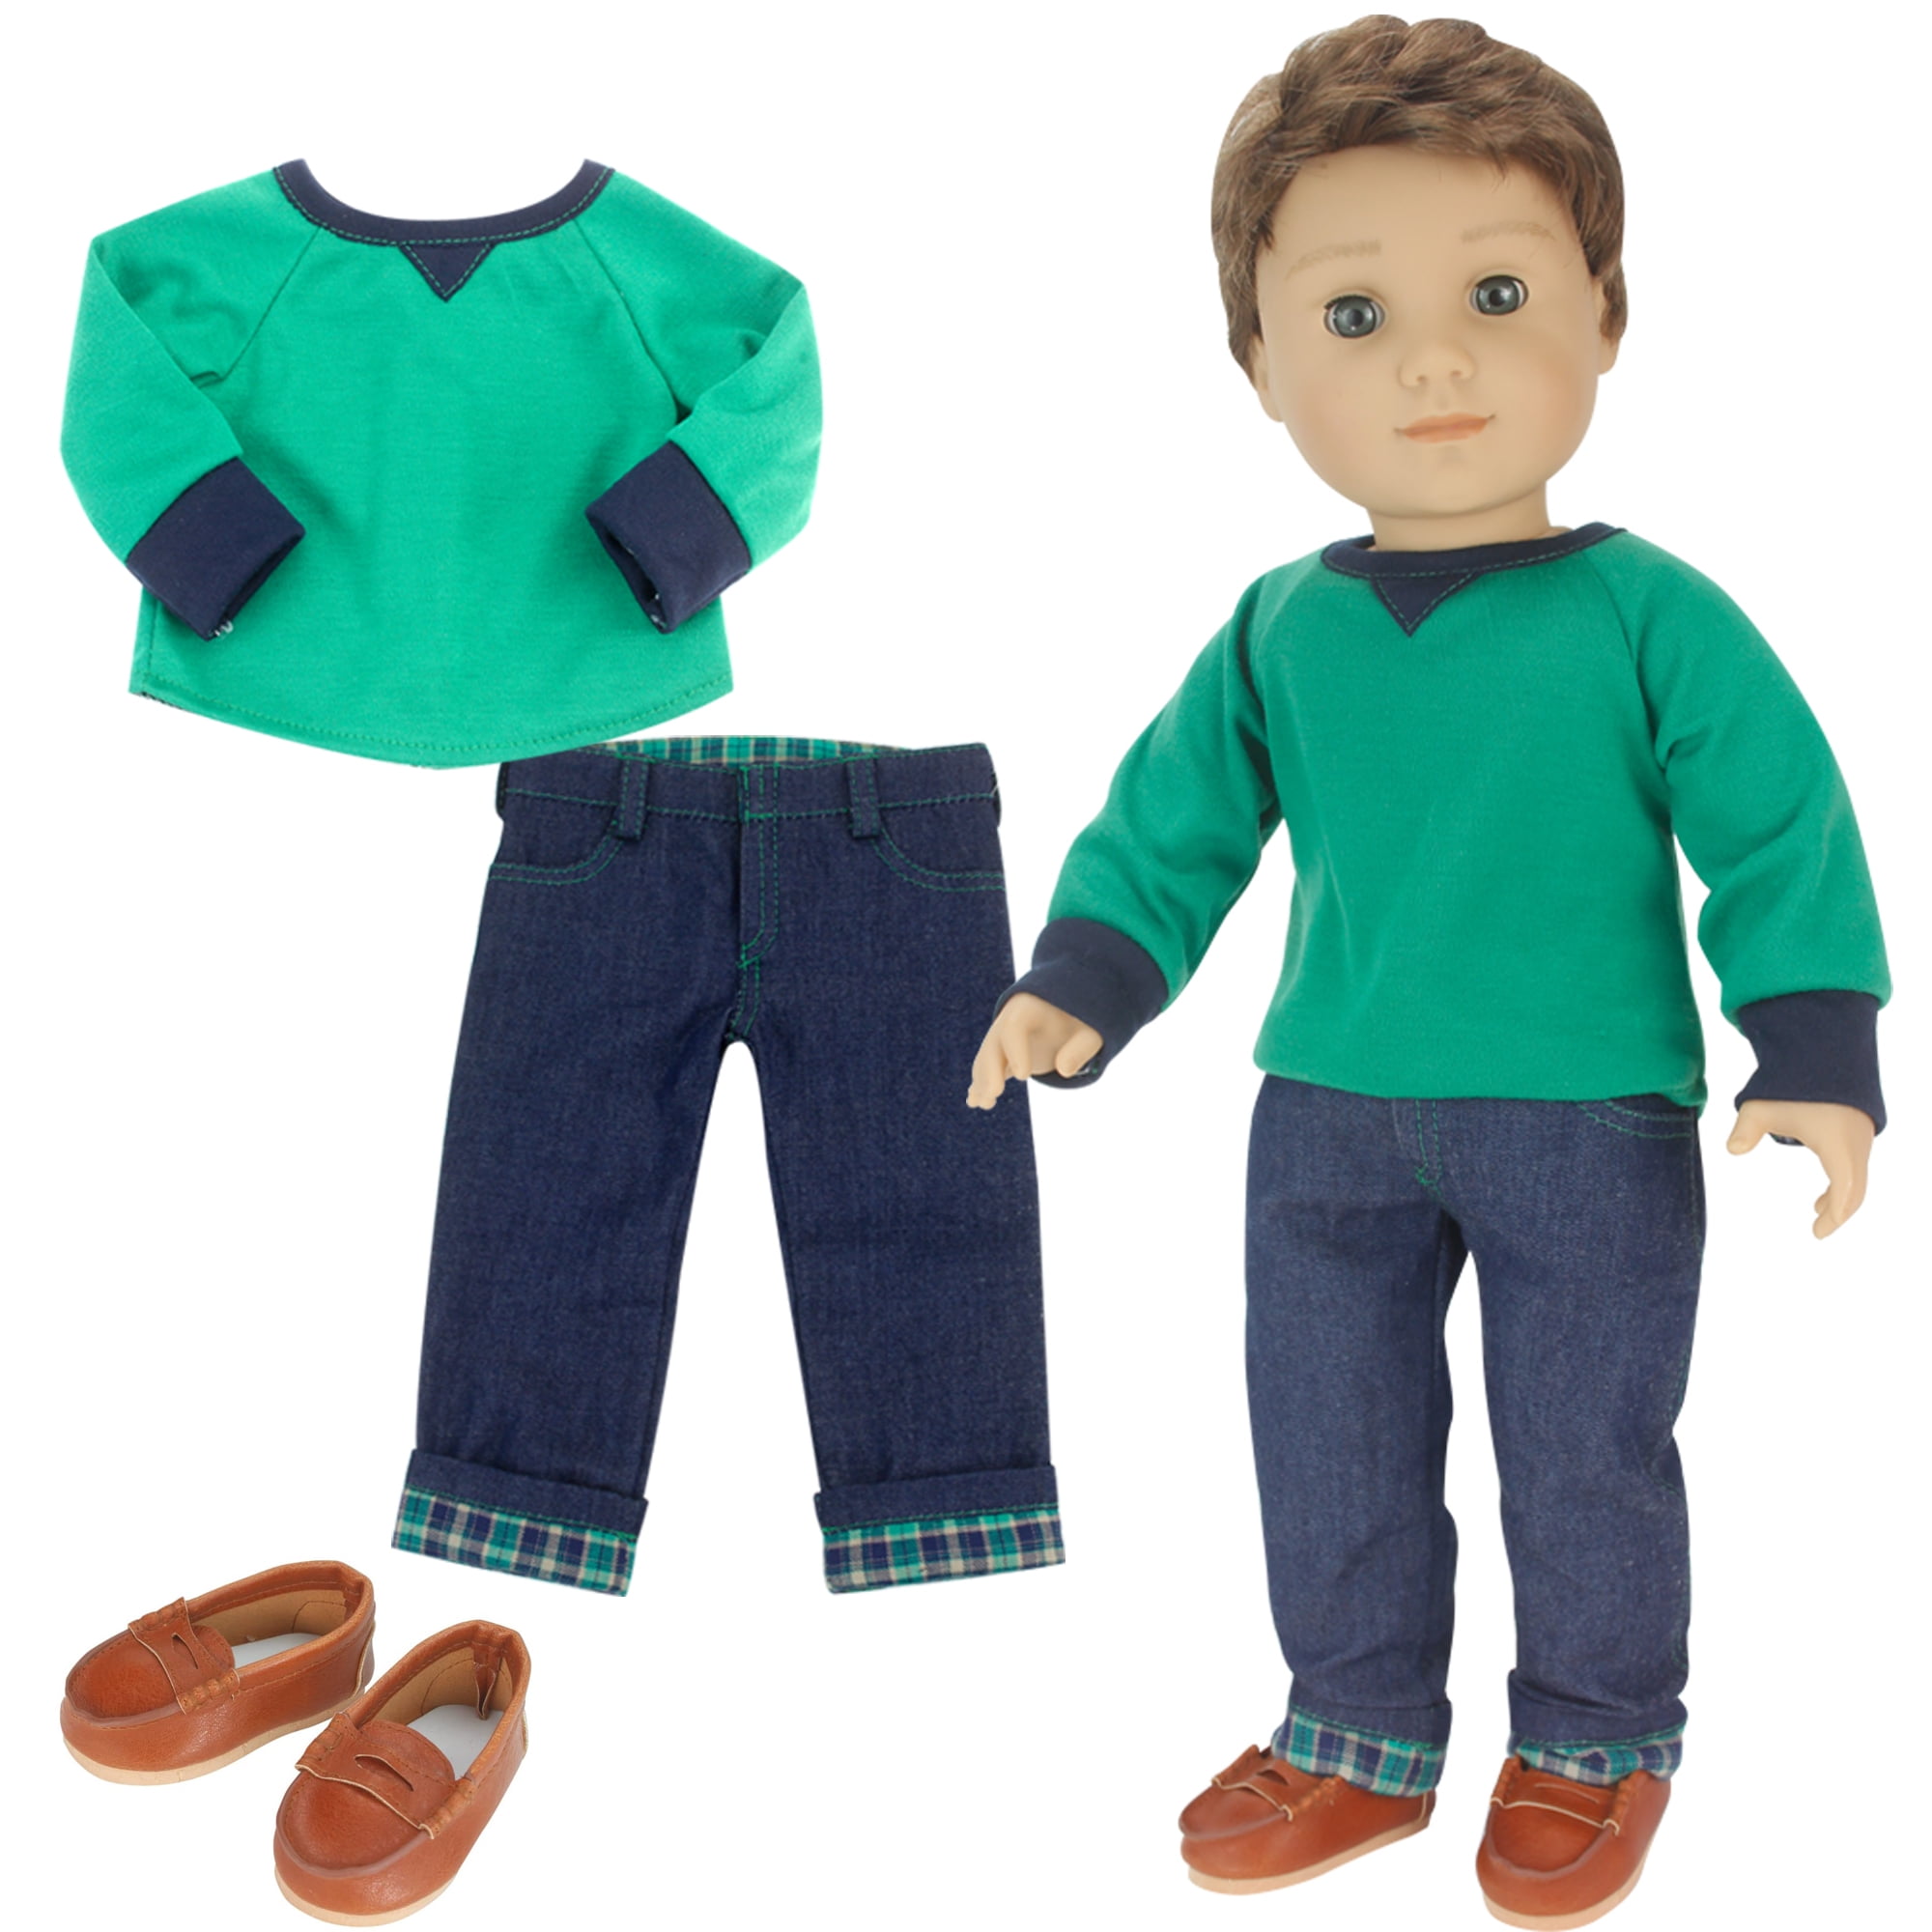 Cabbage Patch Doll Clothes 16 Inch Boy Size Blue Check Shirt and Pants No Doll